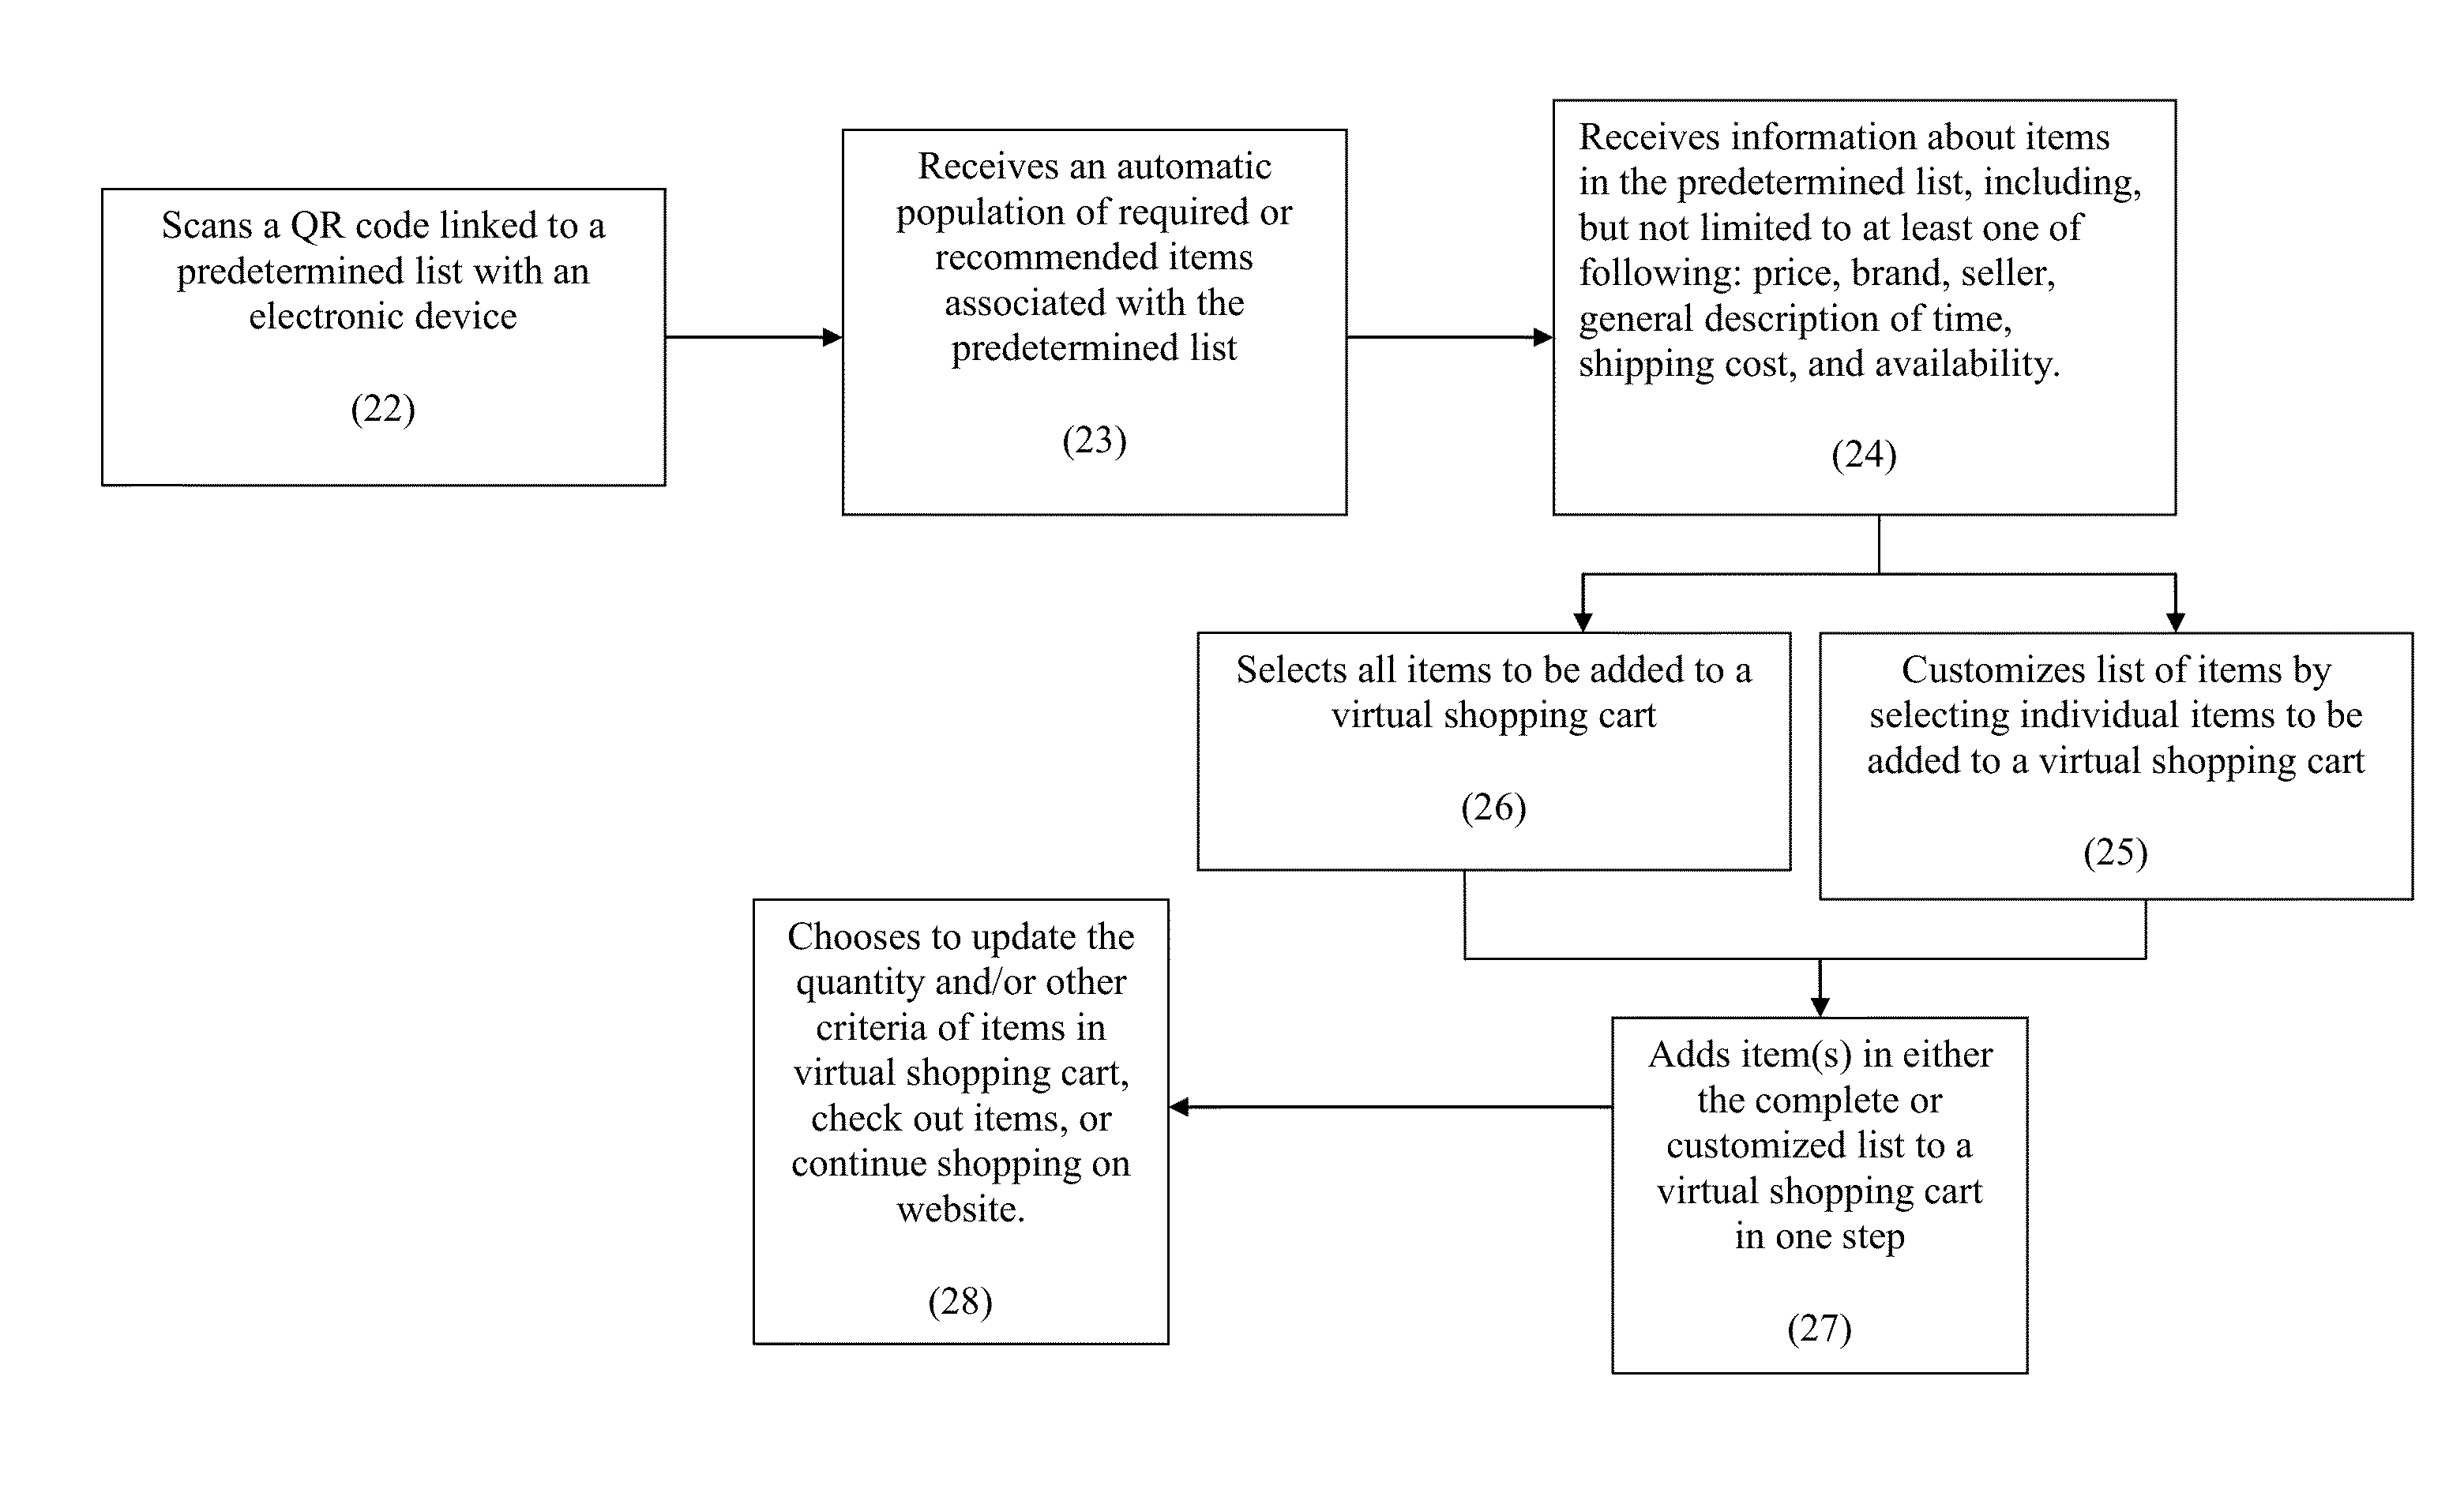 Method for automatically filling a virtual shopping cart with items